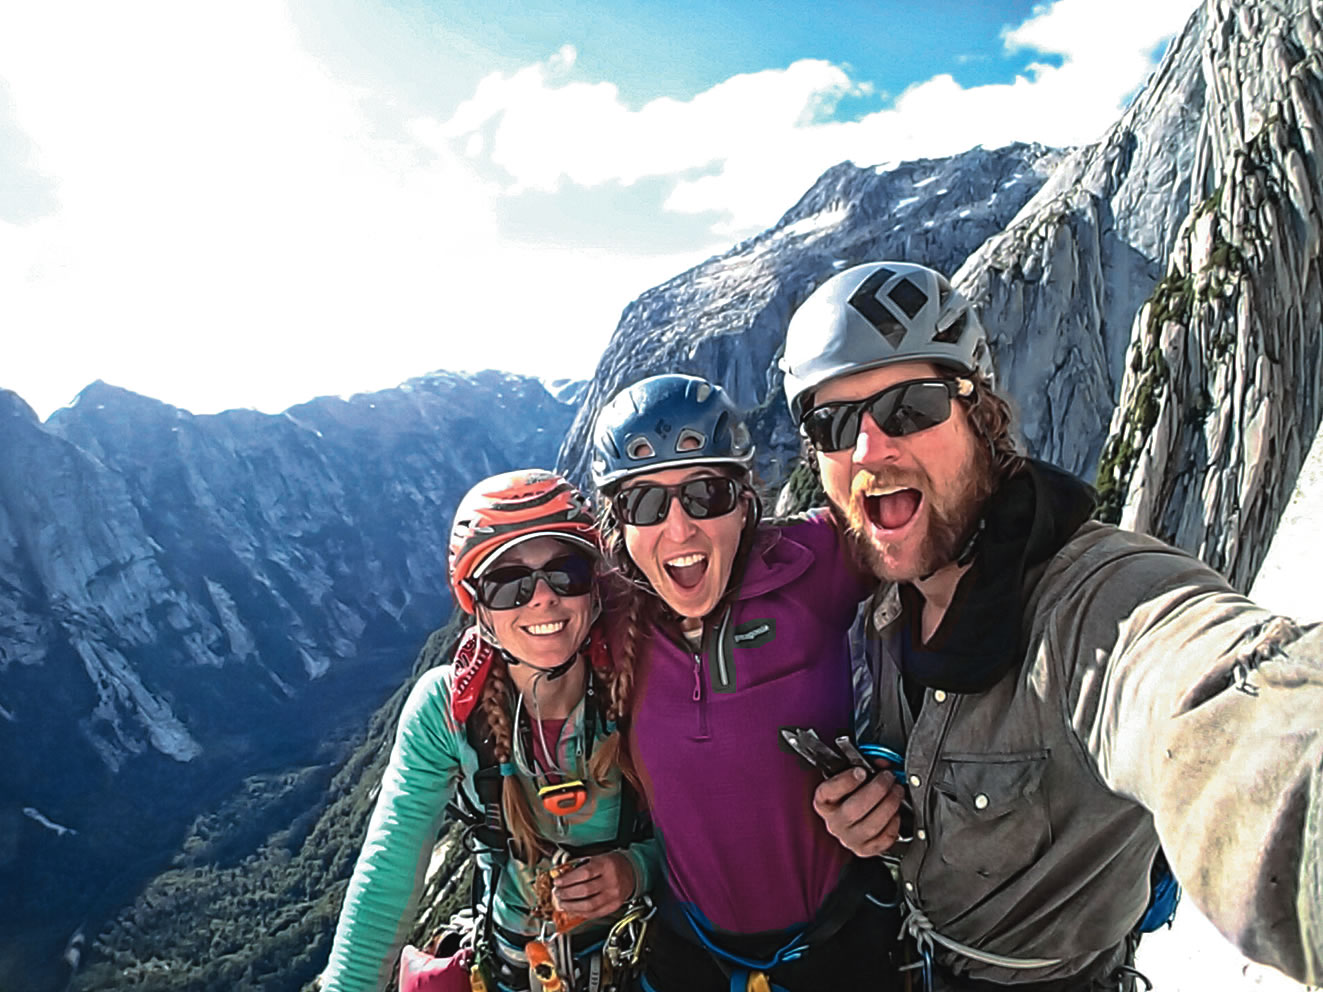 From left to right: Sauter, Althea Rogers and Niels Tietze near the top of El Hermano, named by the late Michael Ybarra. The team made the first ascent in honor of Ybarra and Gil Weis, who had dreamed of the route. [Photo] Niels Tietze